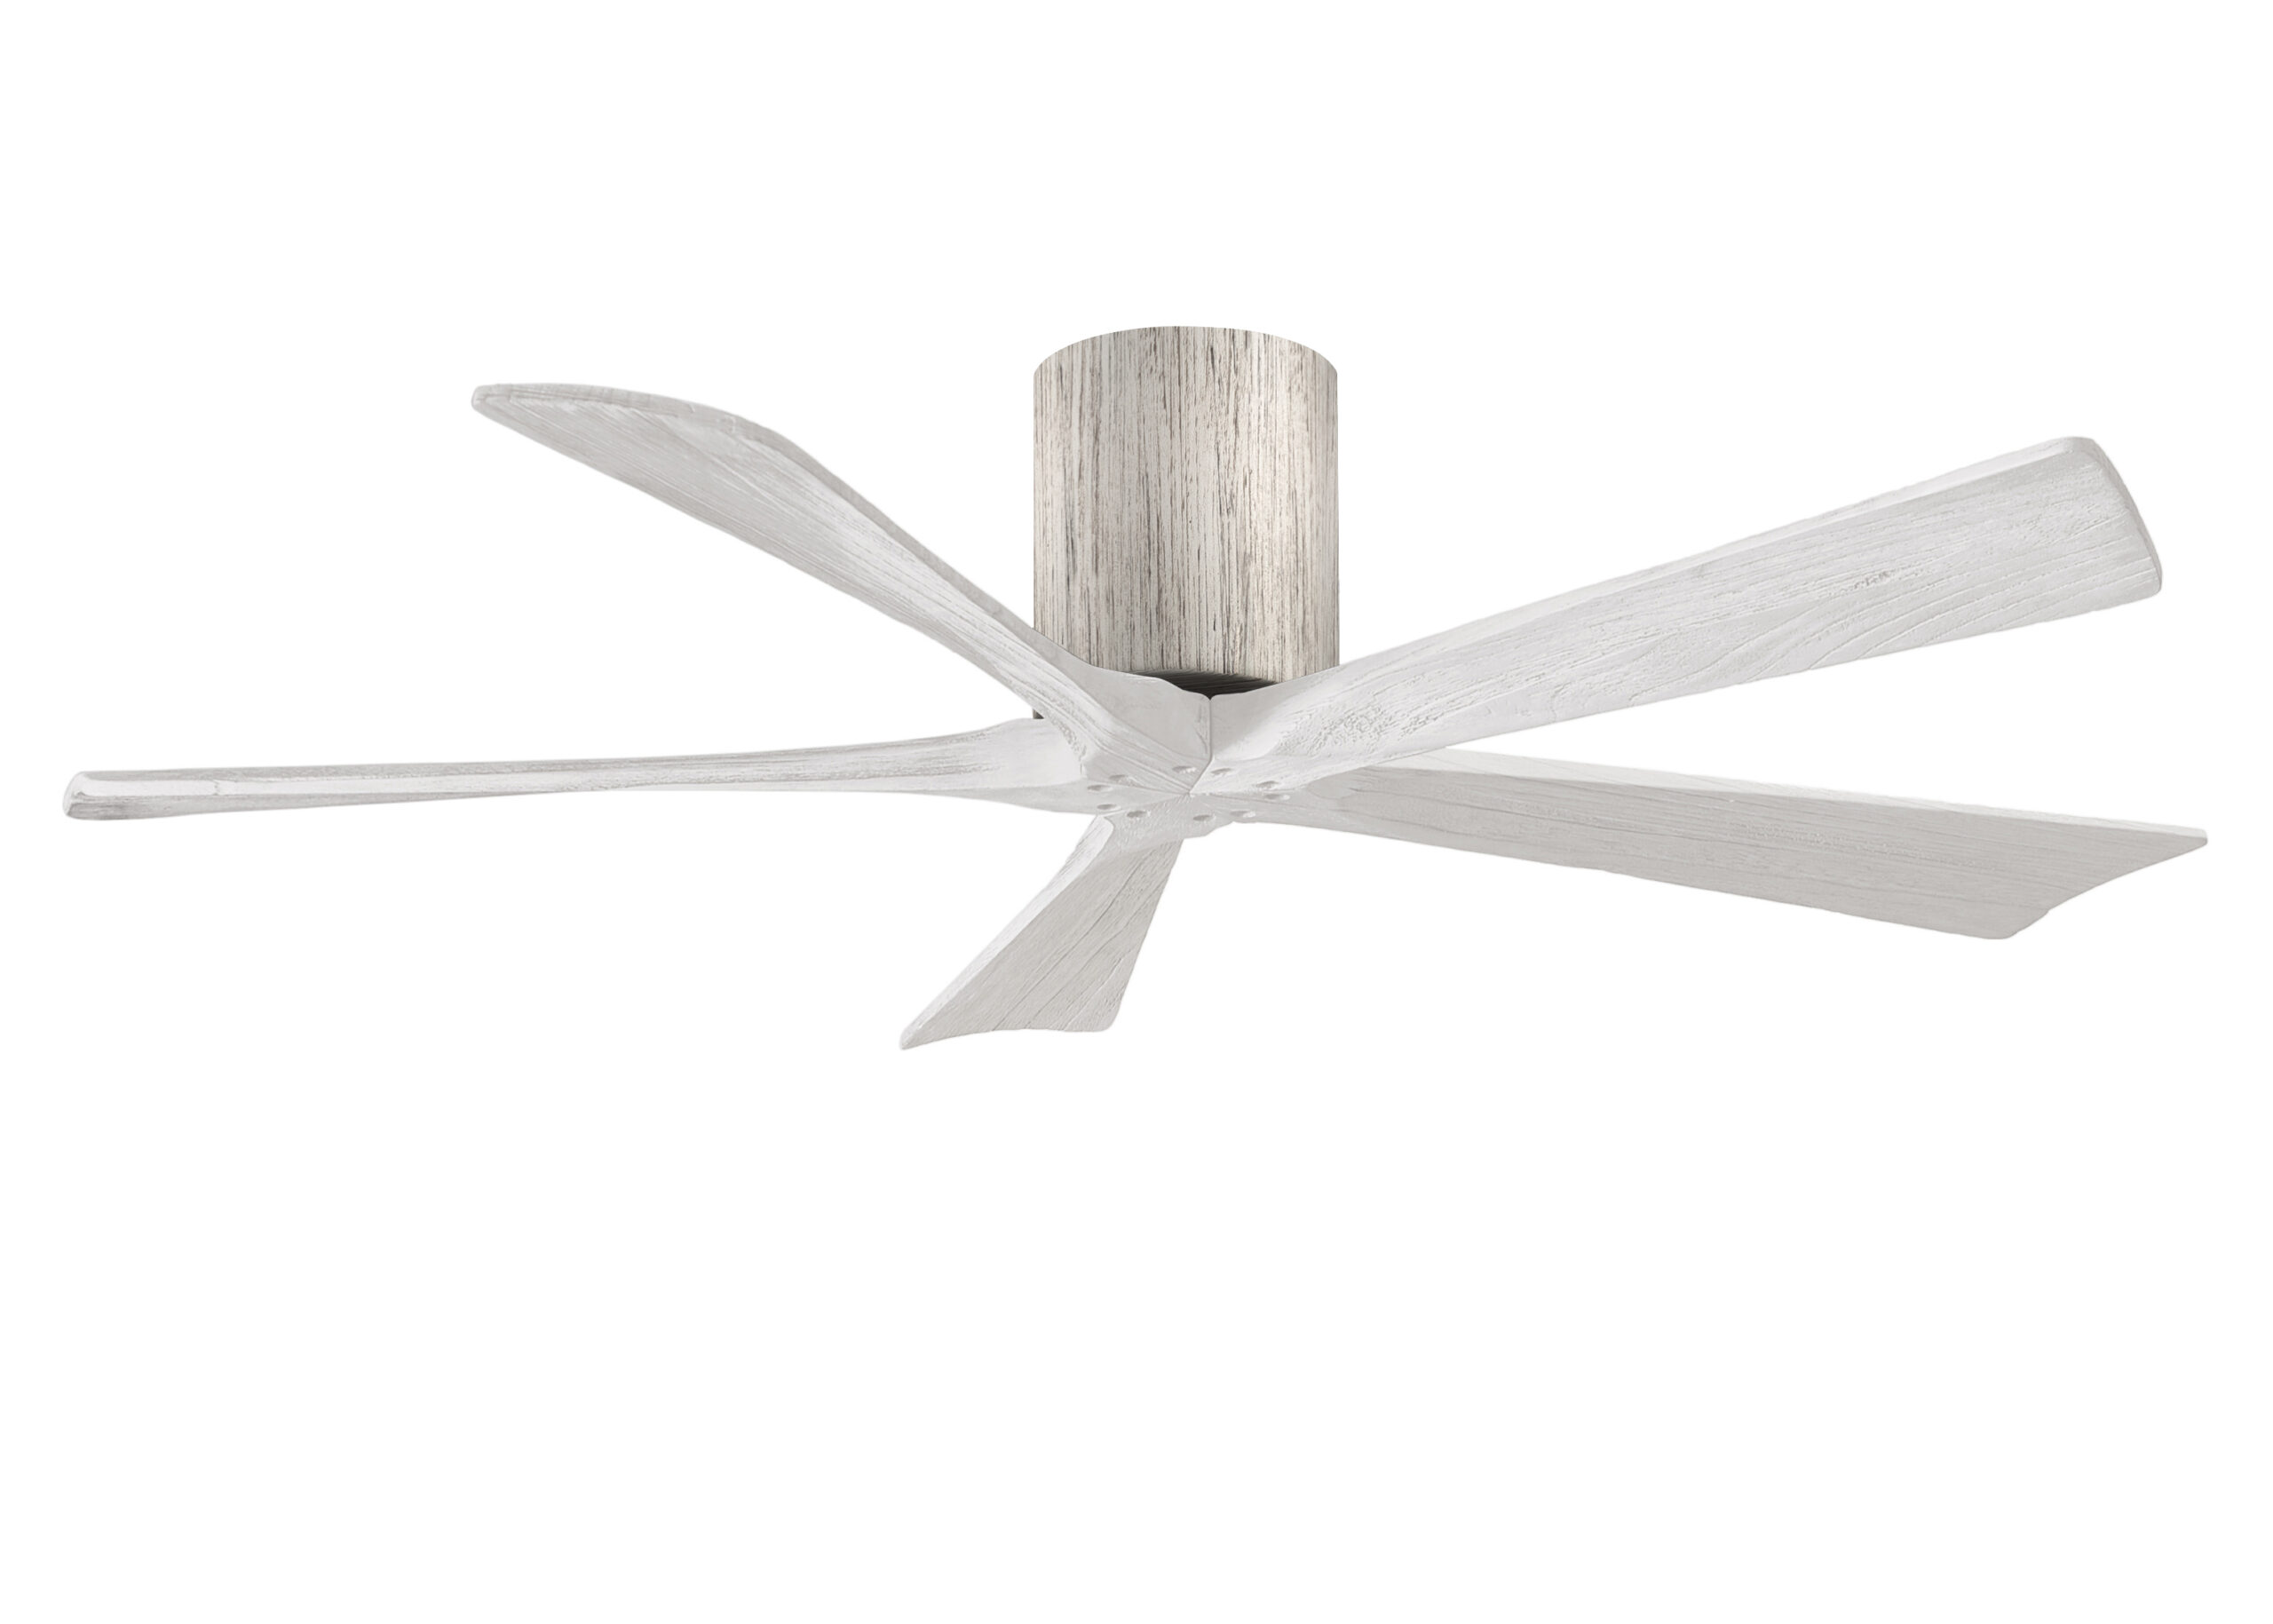 Irene-5H Ceiling Fan in Barn Wood Finish with 52